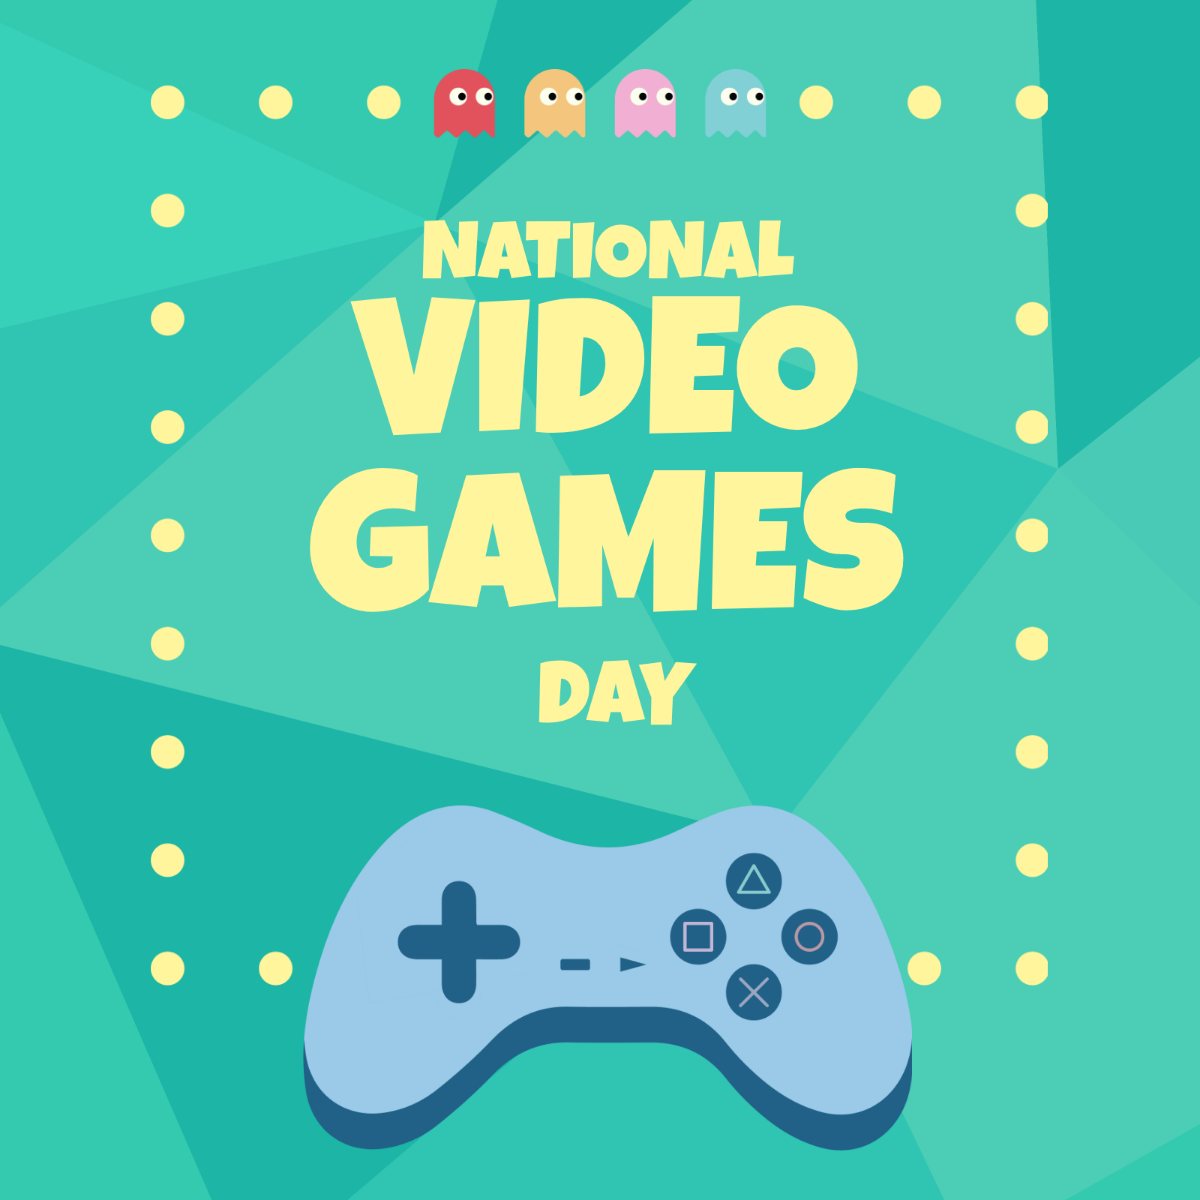 National Video Games Day WhatsApp Post